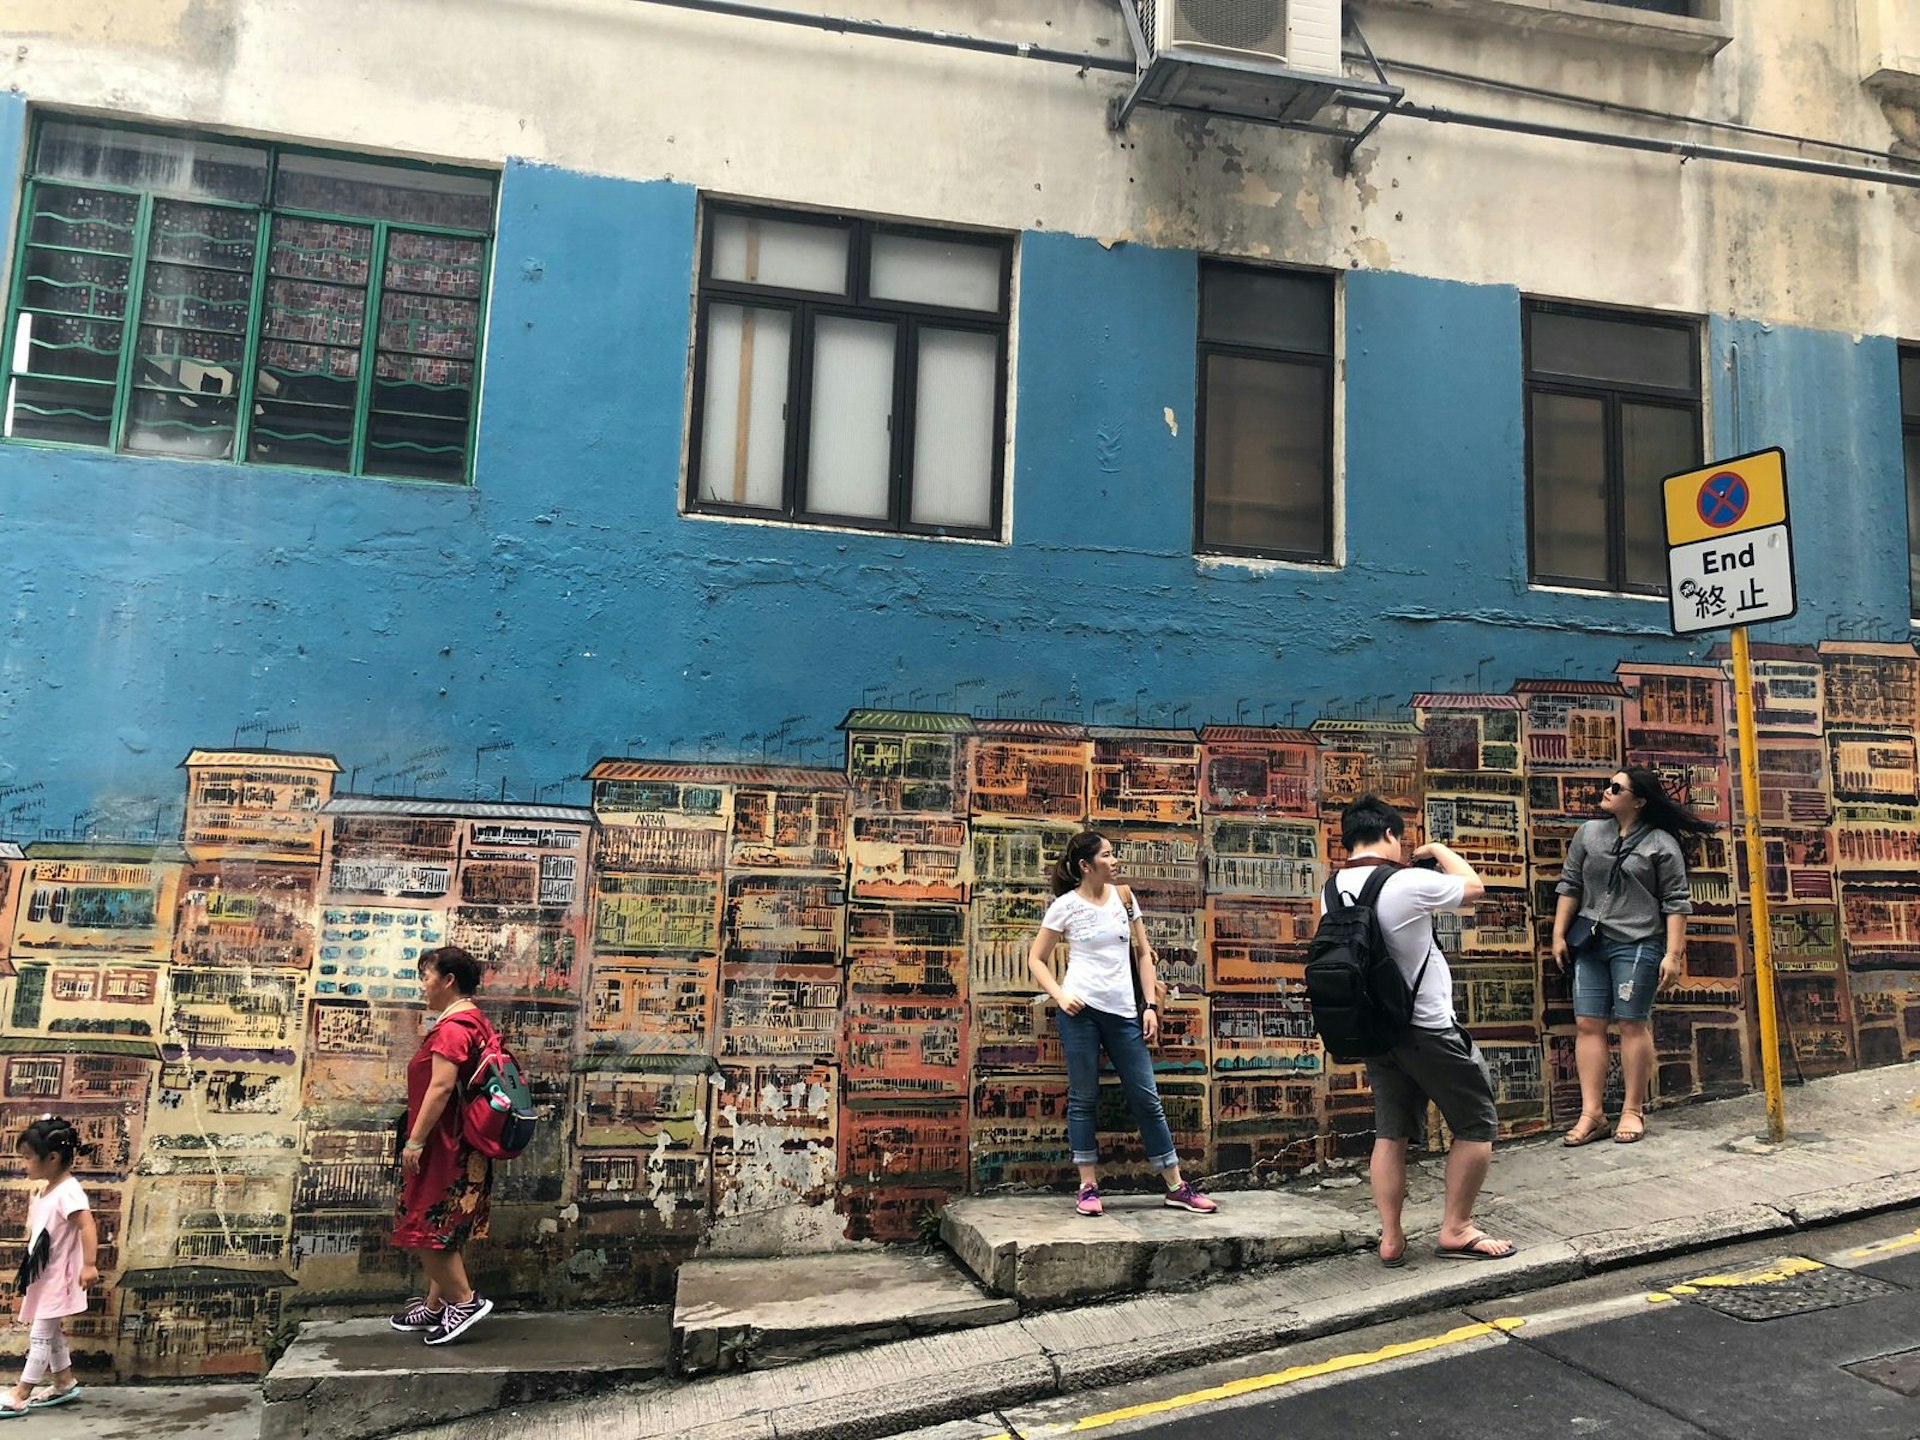 A wall painting of tenement houses with people posing for pictures in front of it.